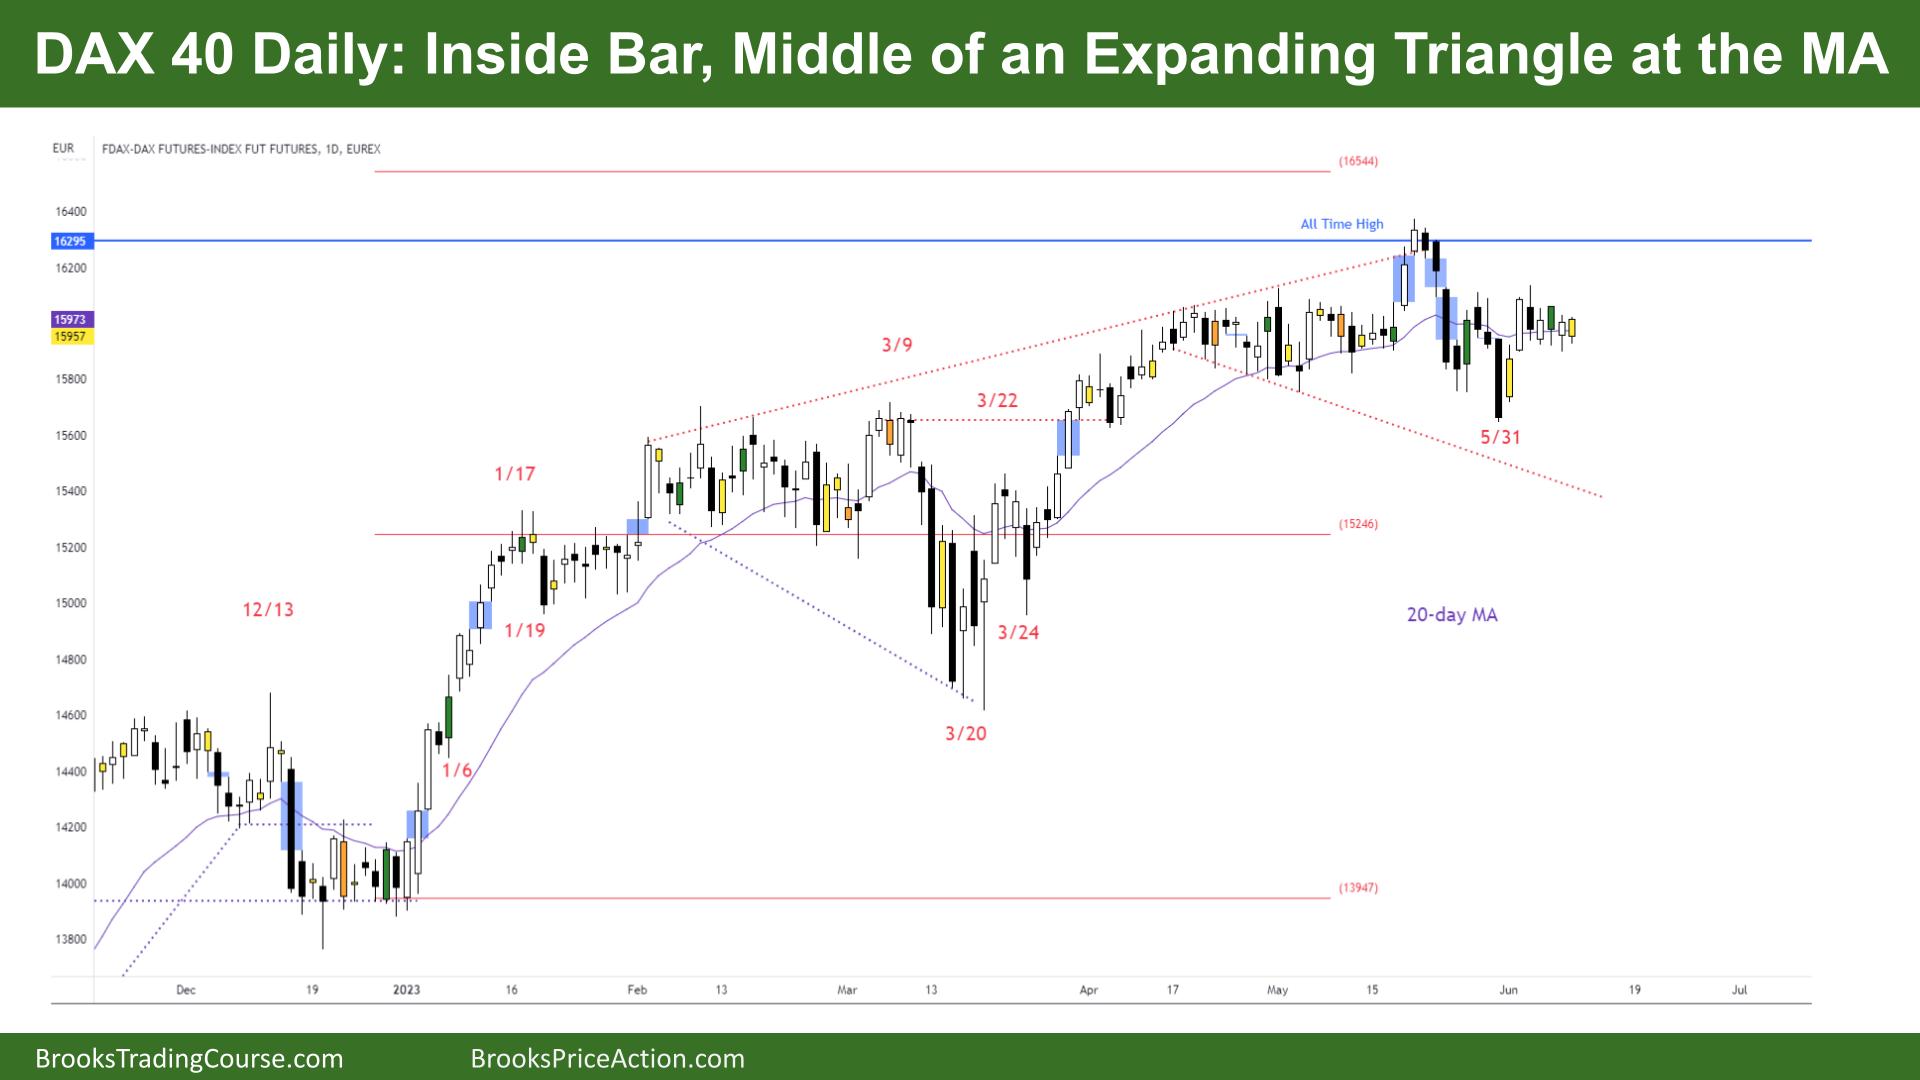 DAX 40 Inside Bar Middle of an Expanding Triangle at the MA